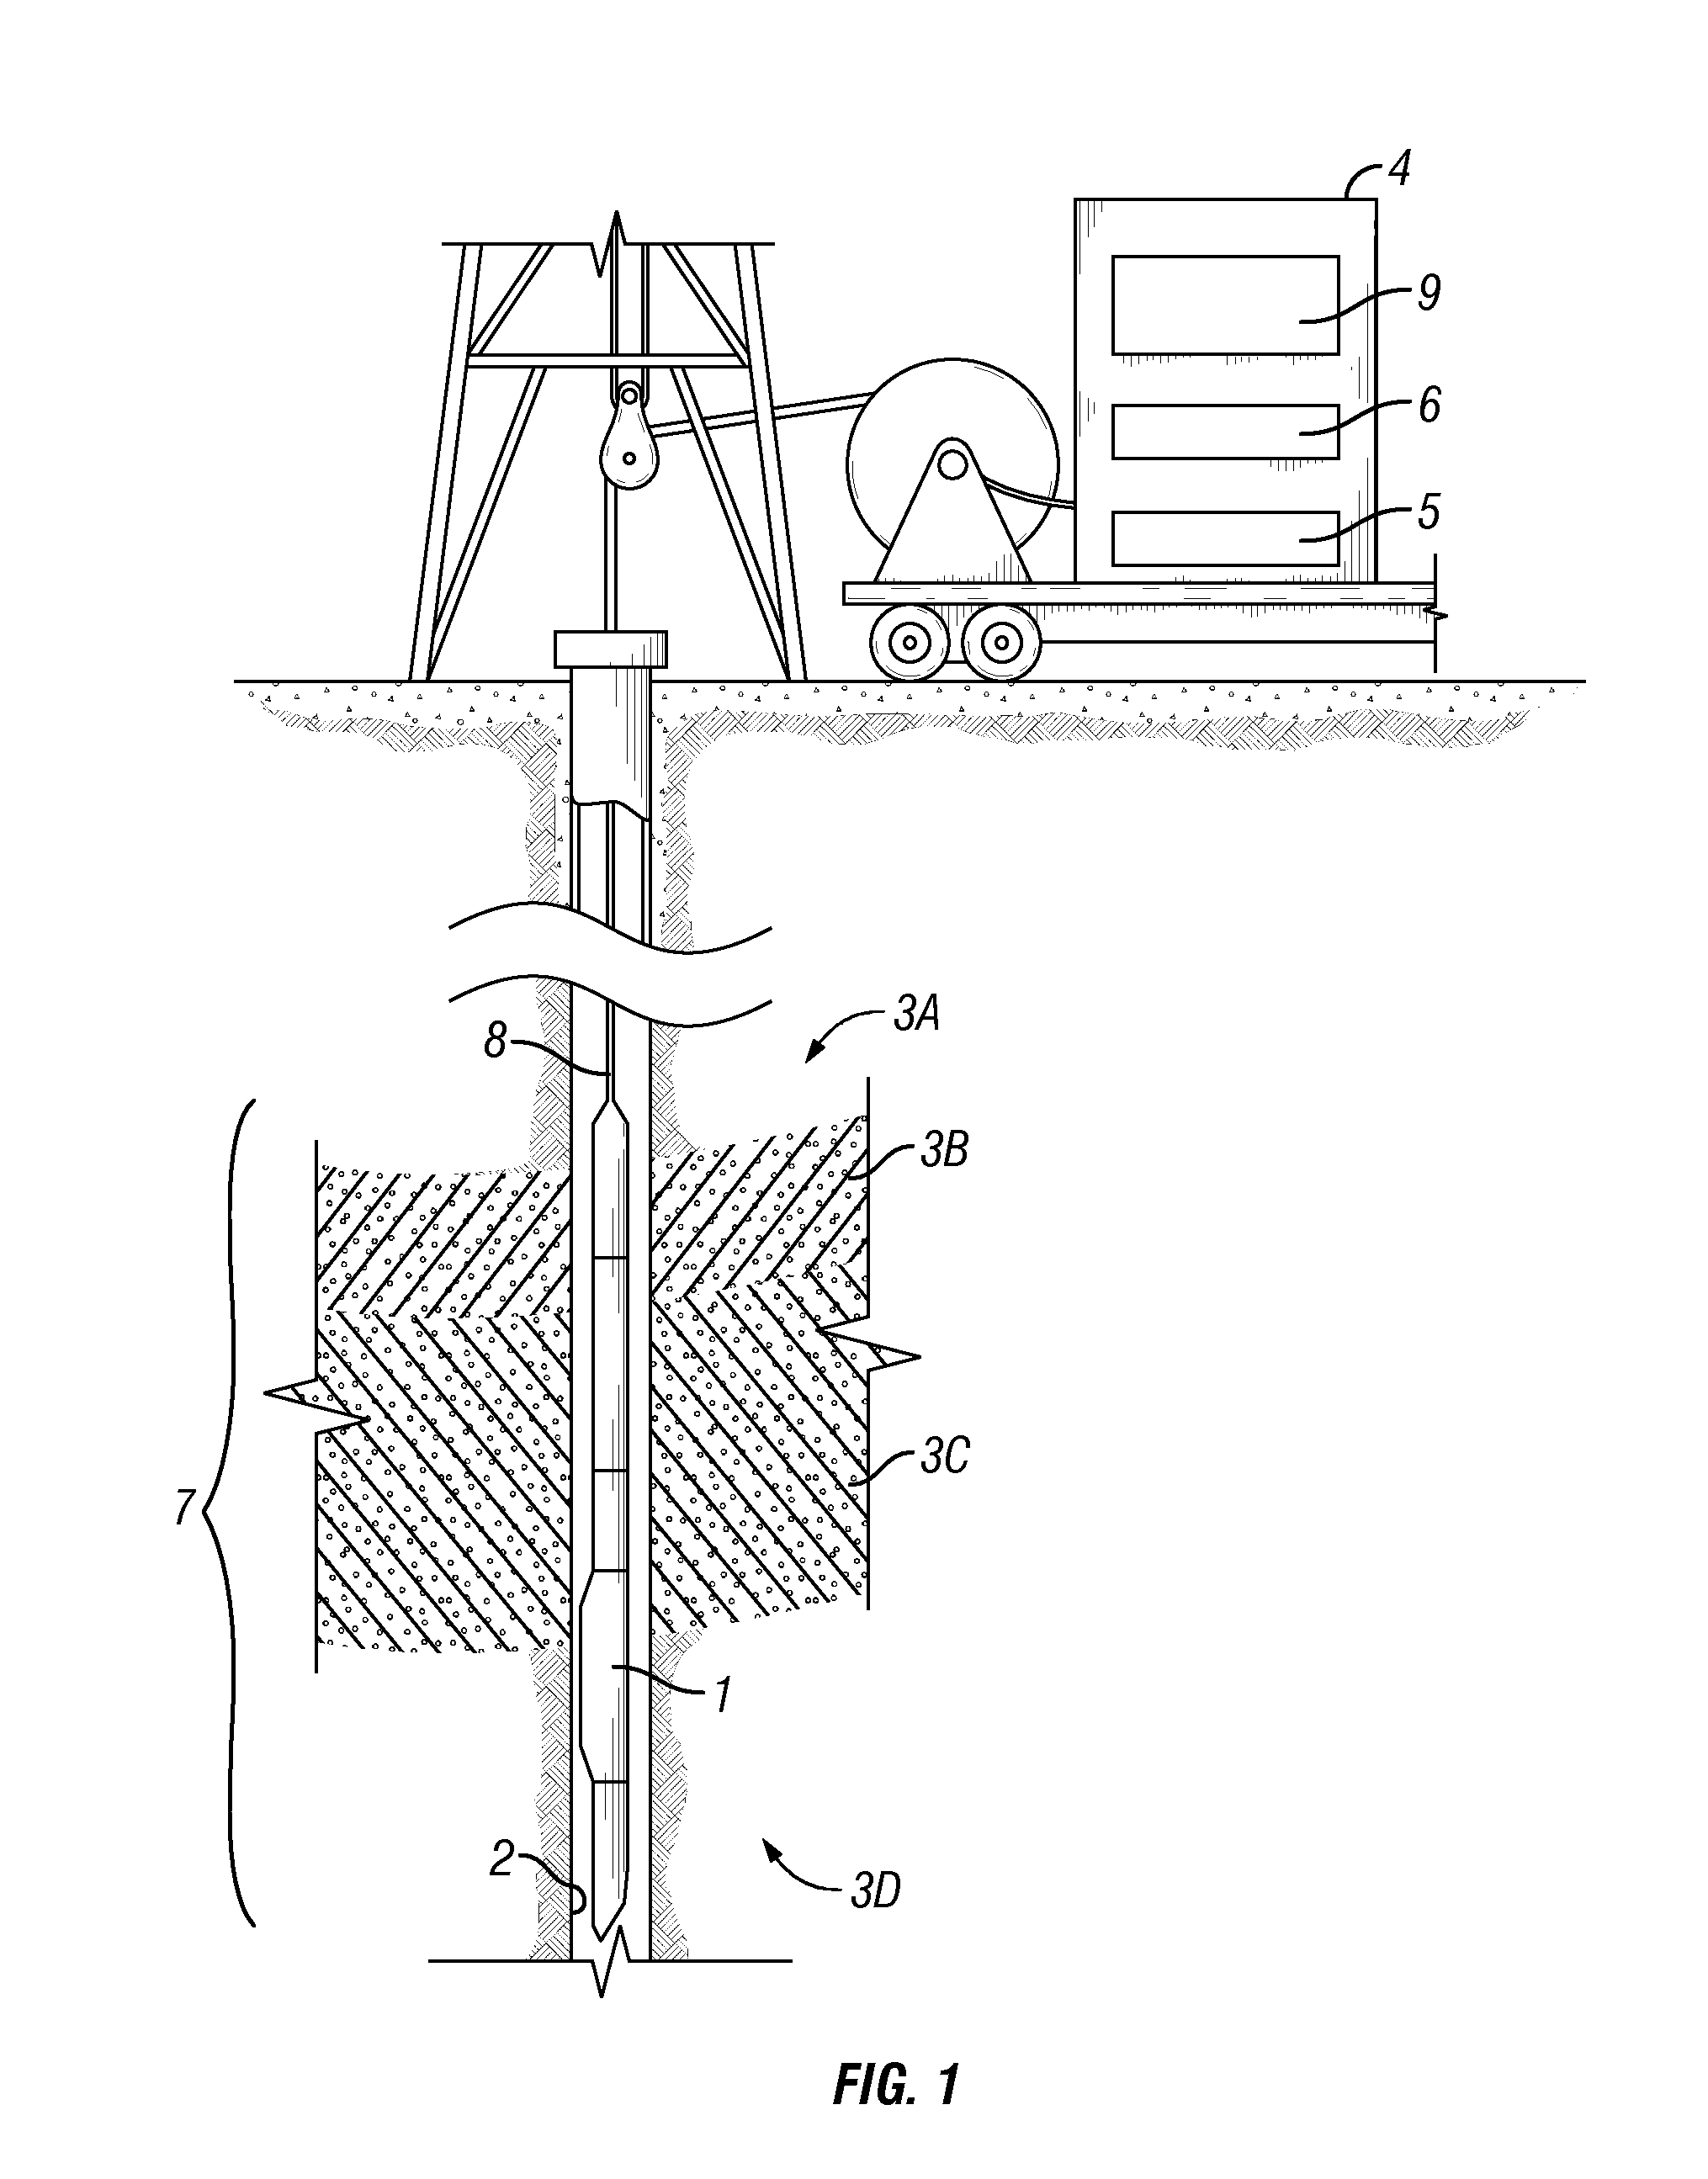 Methods for quantitative lithological and mineralogical evaluation of subsurface formations